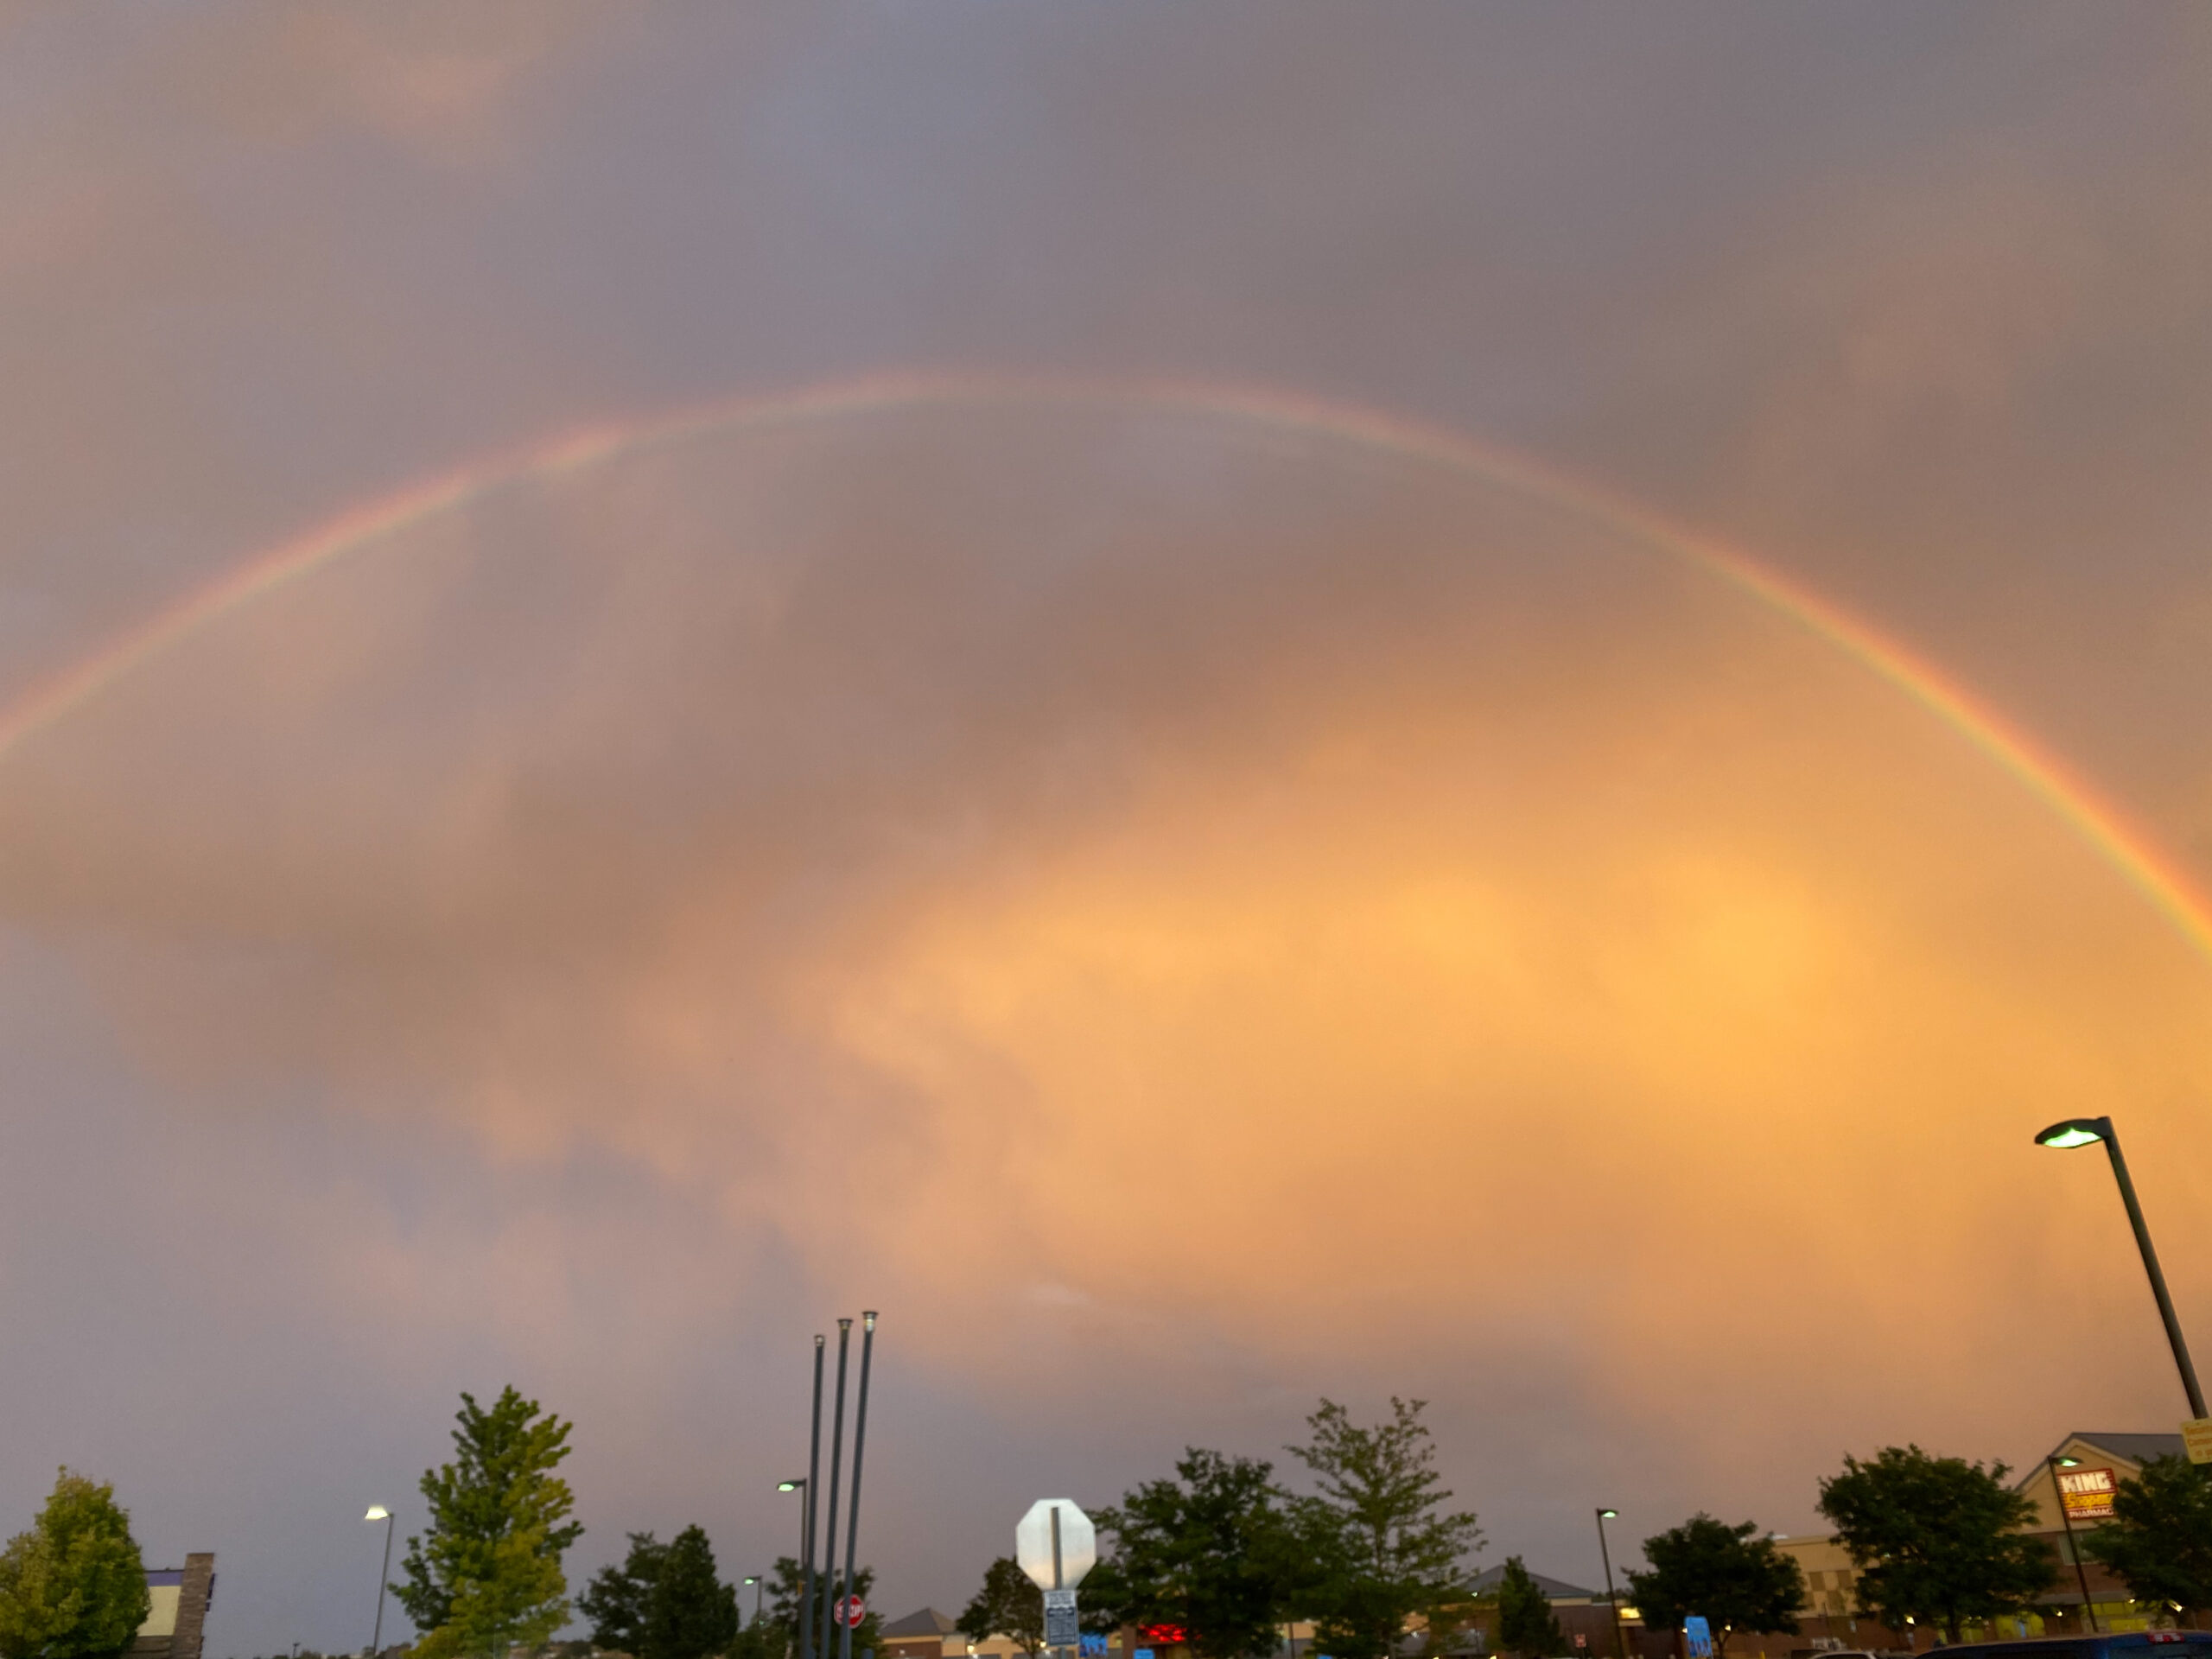 a full rainbow with a second one starting there in the corner of this golden sky! #coloradosummers #chasingrainbows